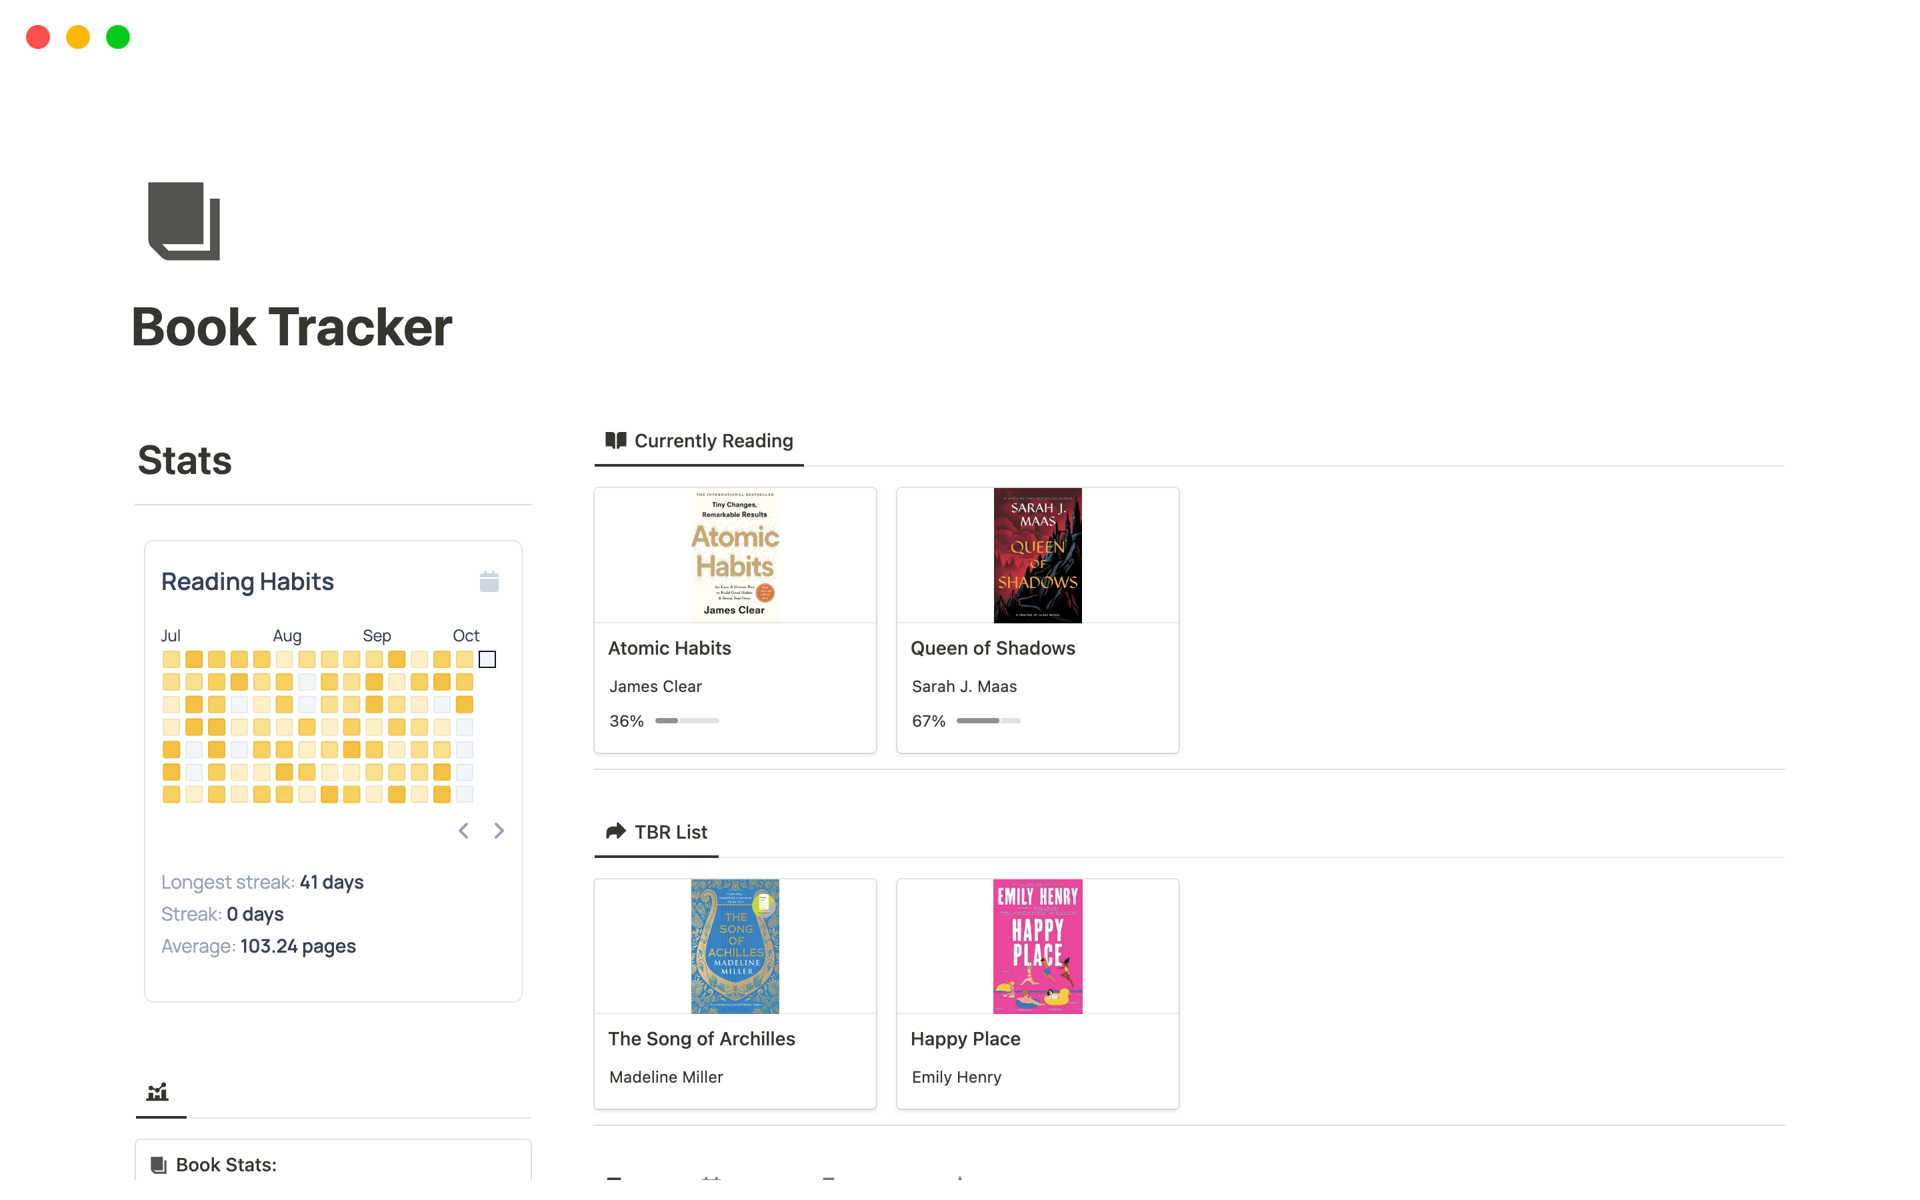 The Book Tracker Notion template is the ultimate digital library, allowing you to seamlessly organize, manage, and enhance your reading experience with features such as bookshelf organisation, TBR list tracking, reading stats, upcoming release tracking, and quote management.